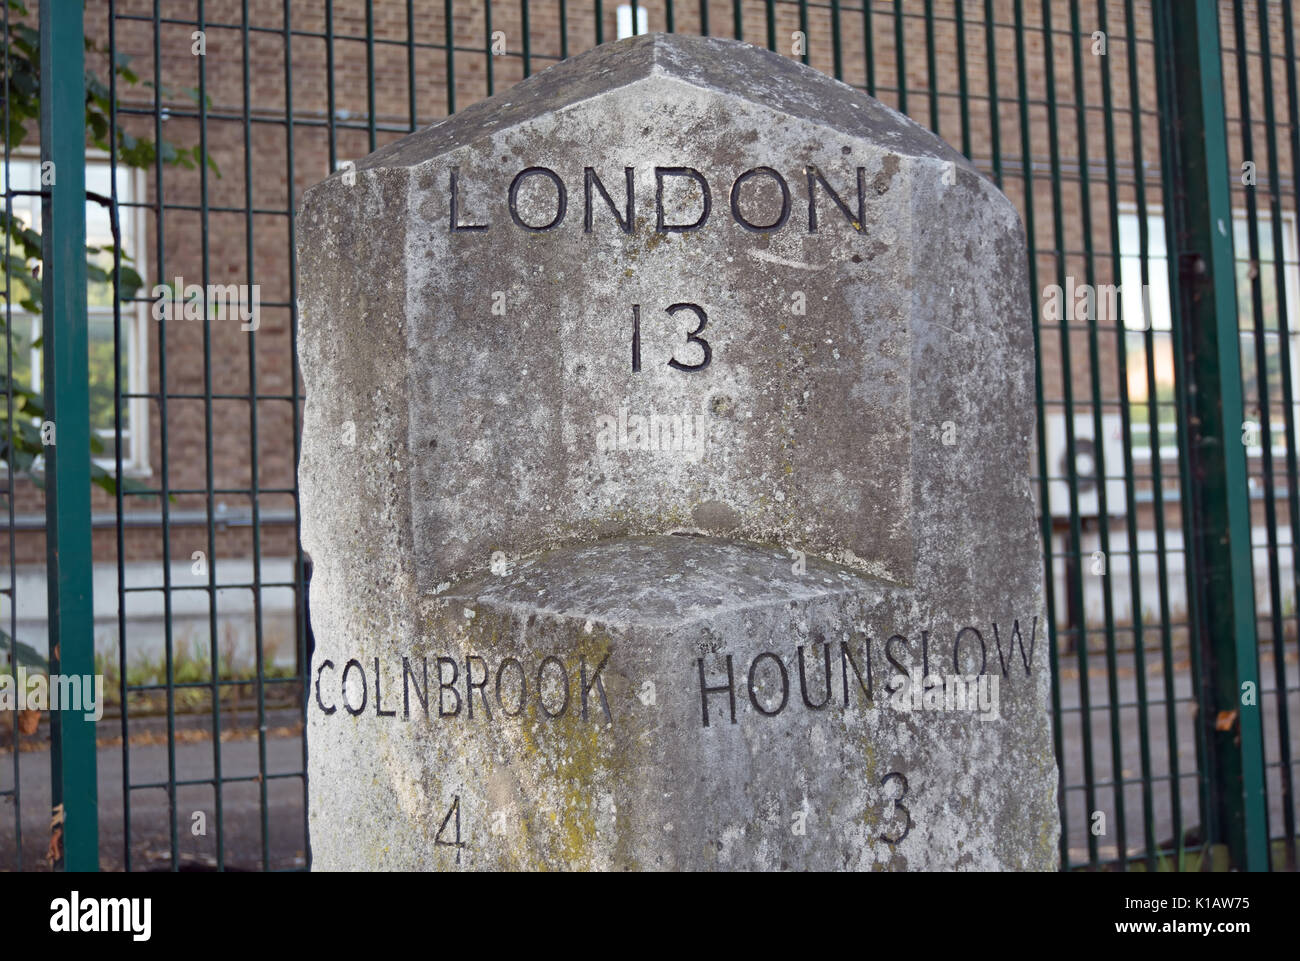 milestone at harlington corner, near heathrow airport, london, england, showing distances in miles to central london, colnbrook and hounslow Stock Photo